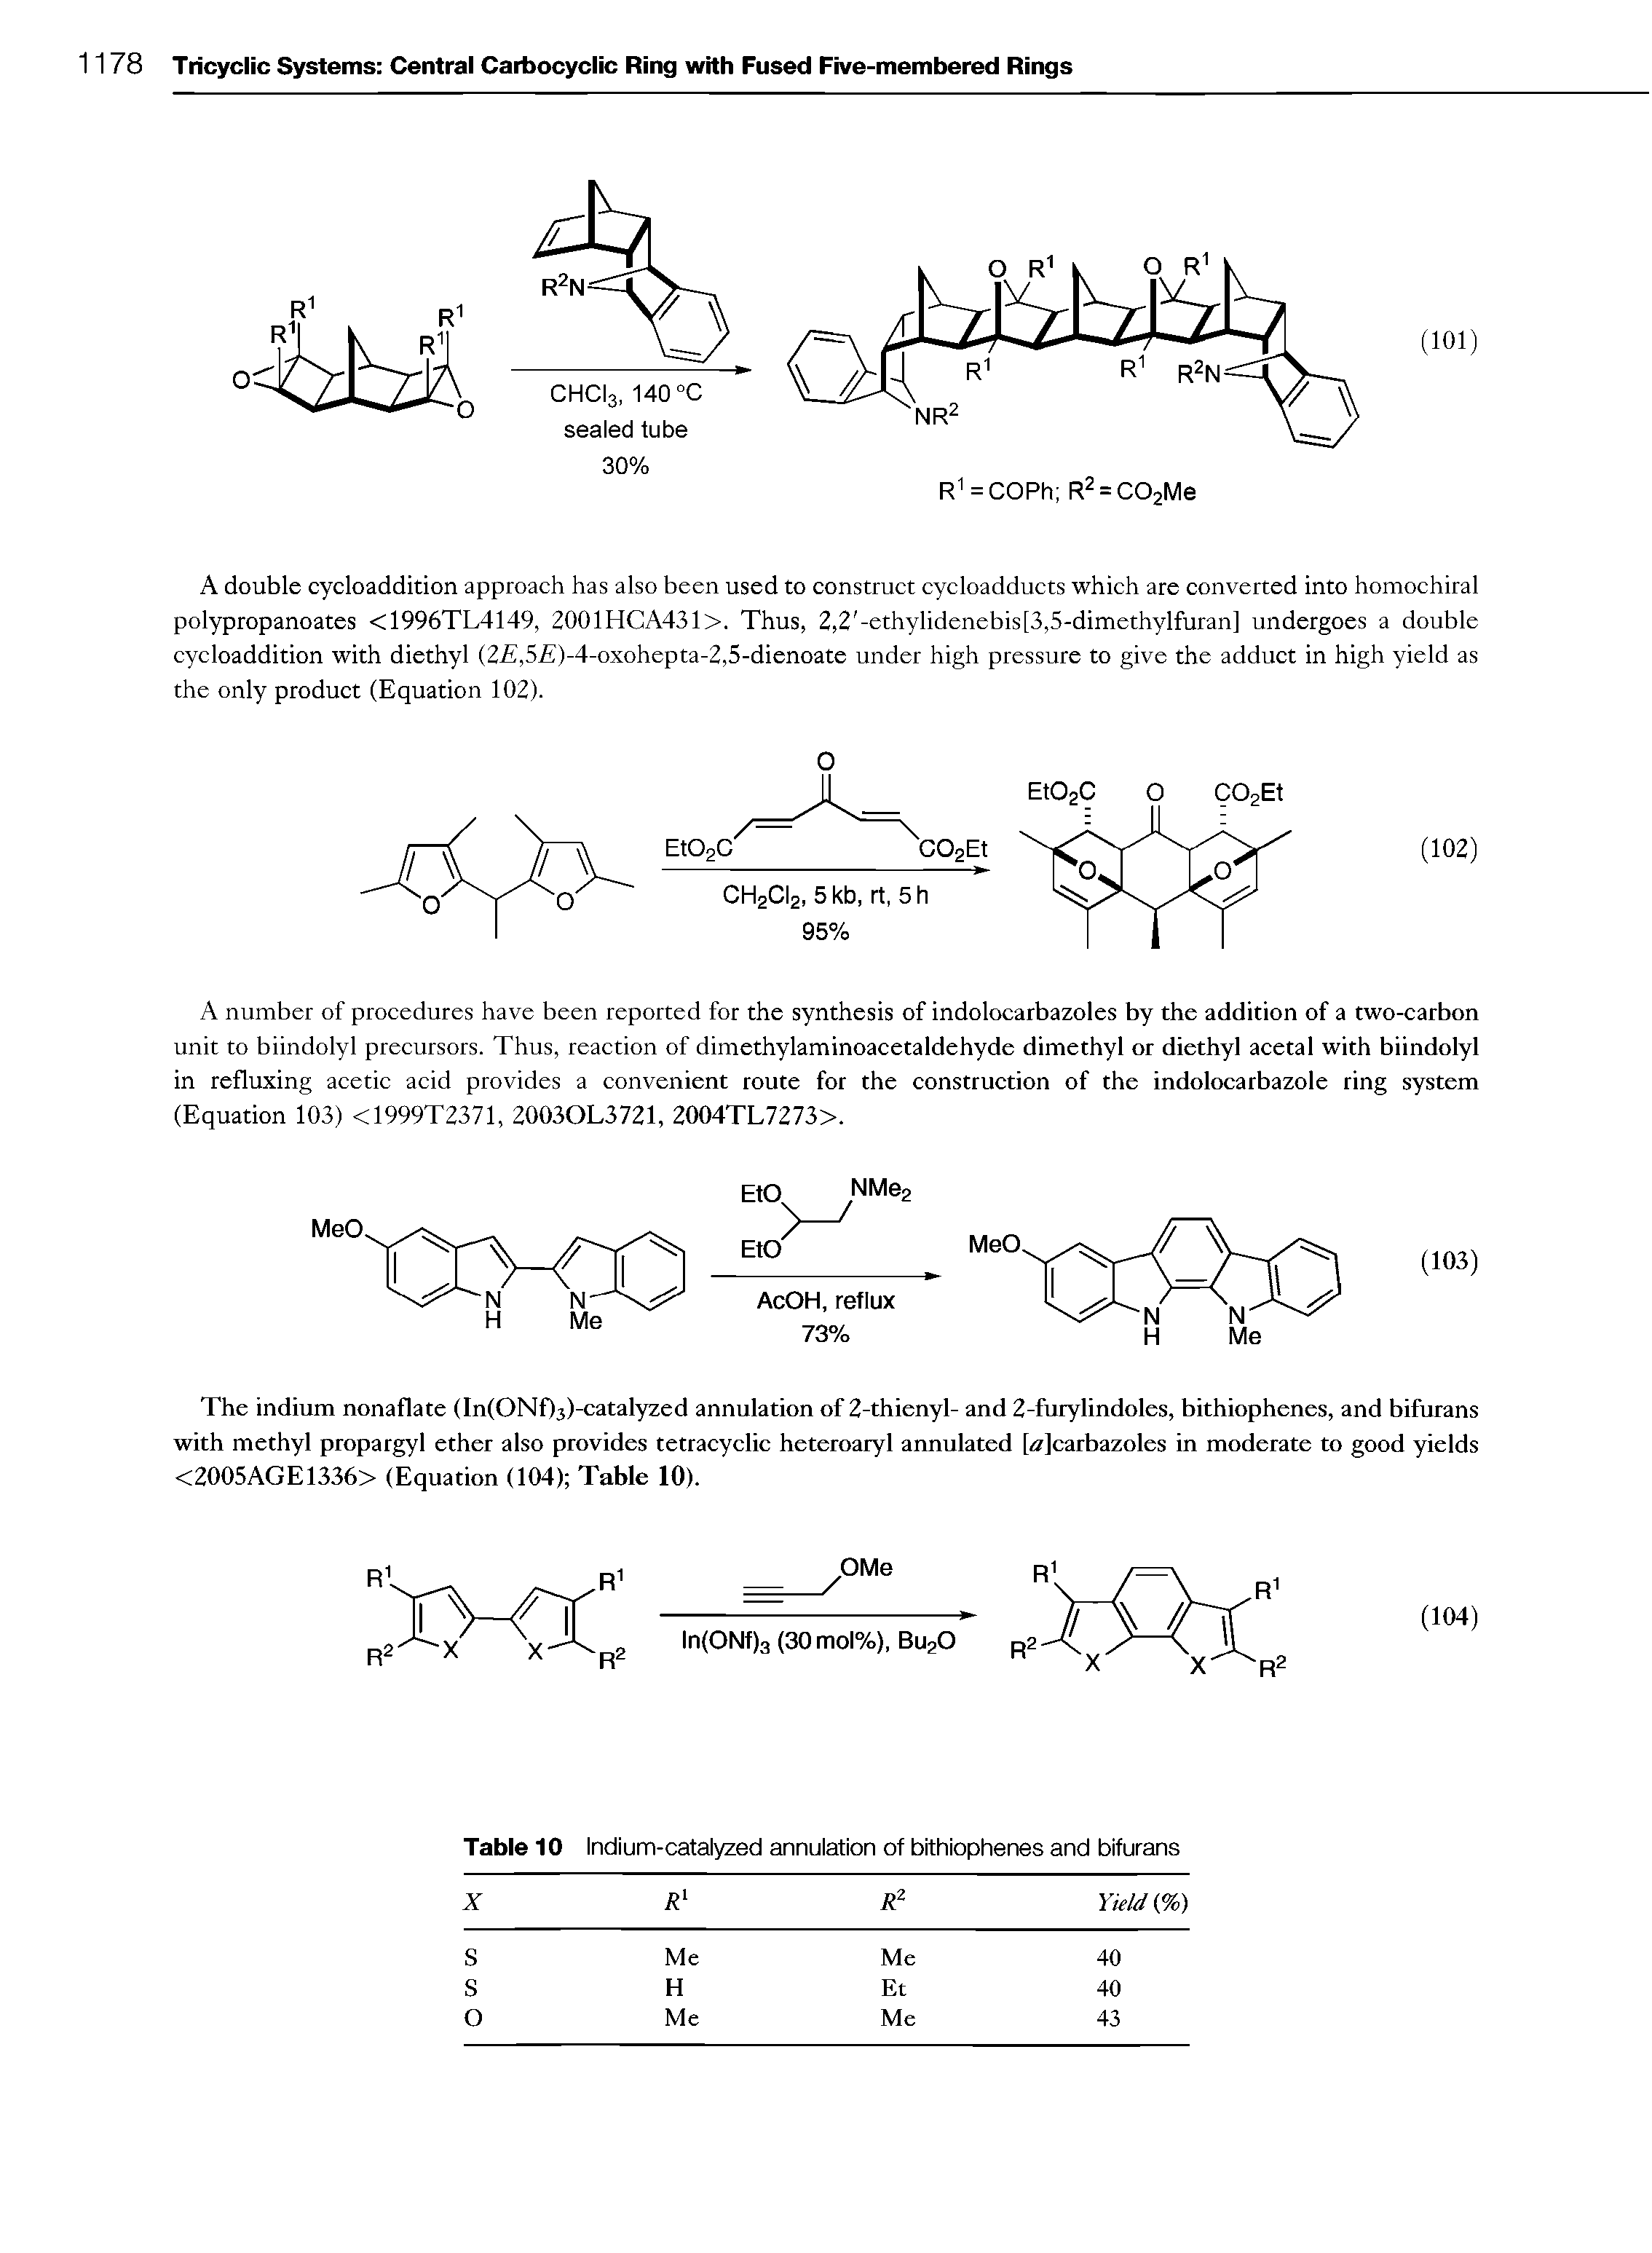 Table 10 Indium-catalyzed annulation of bithiophenes and bifurans...